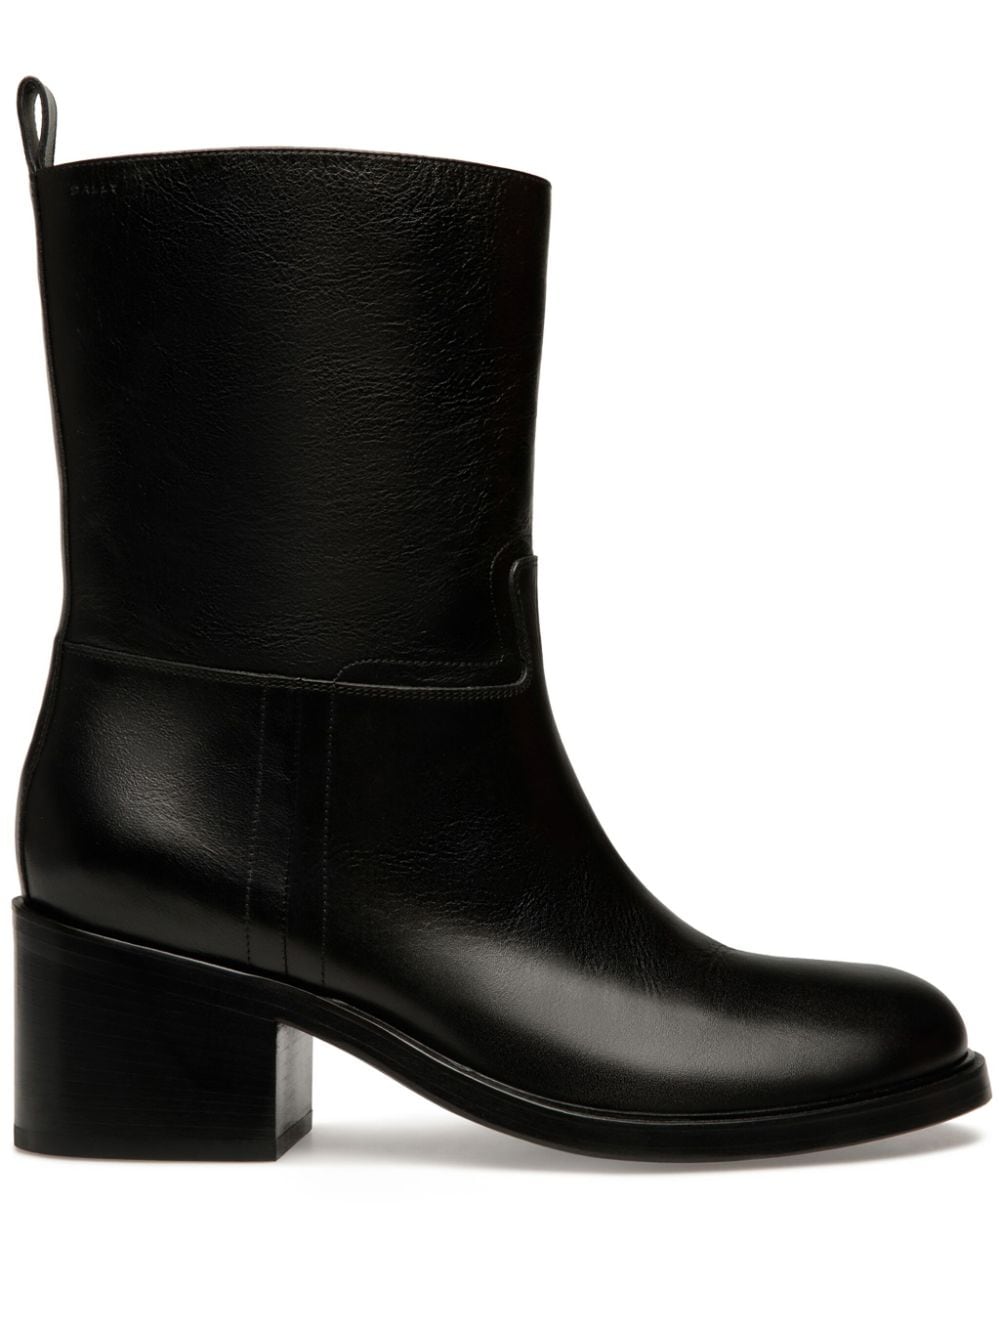 Bally Peggy 55mm leather boots - Black von Bally